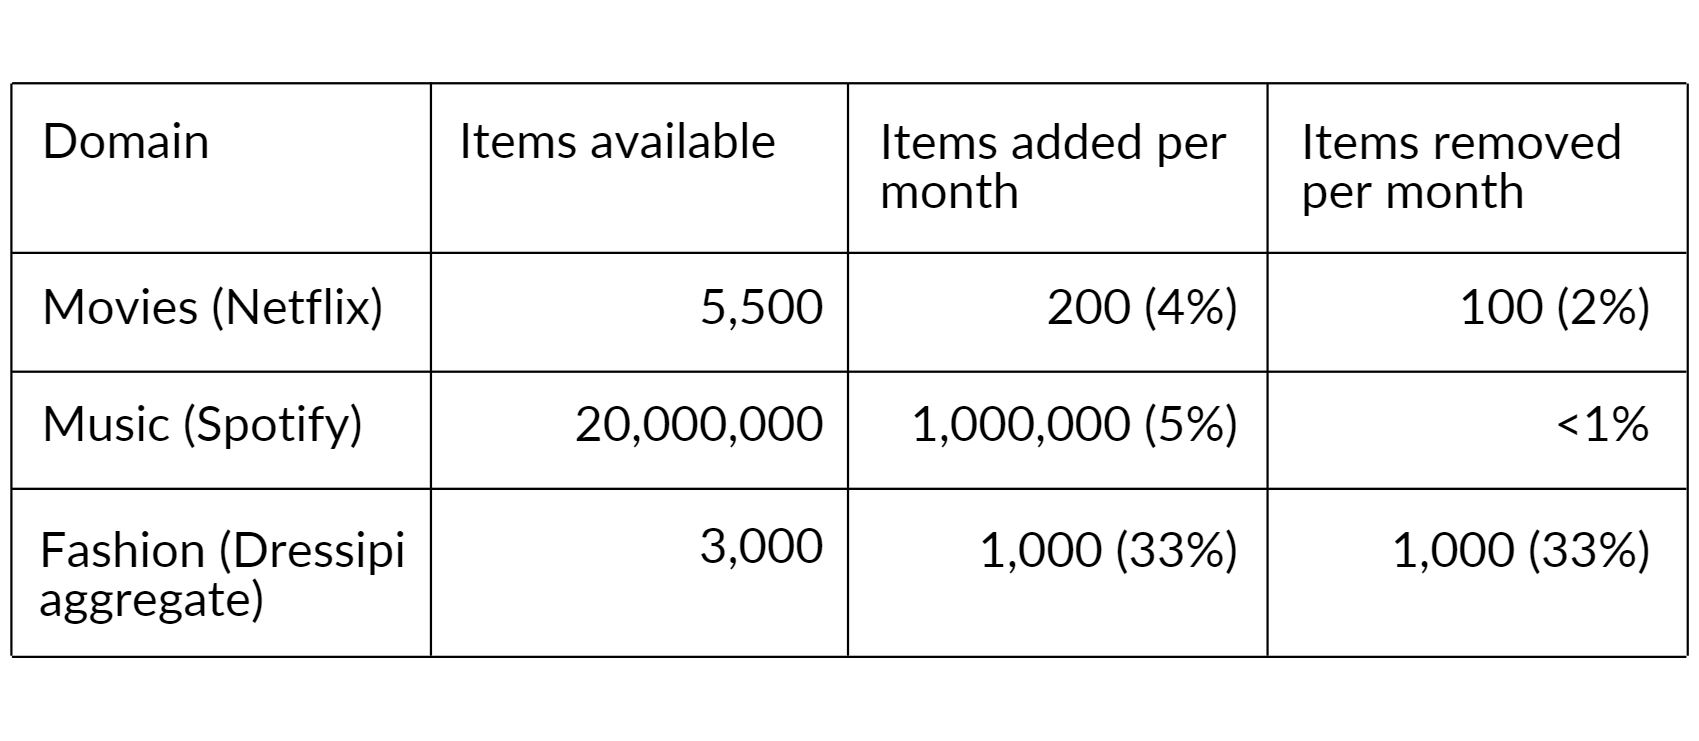 Table showing number of items available, number of items added per month, and number of items removed per month for movies (Netflix), music (Spotify), and fashion (Dressipi aggregate)